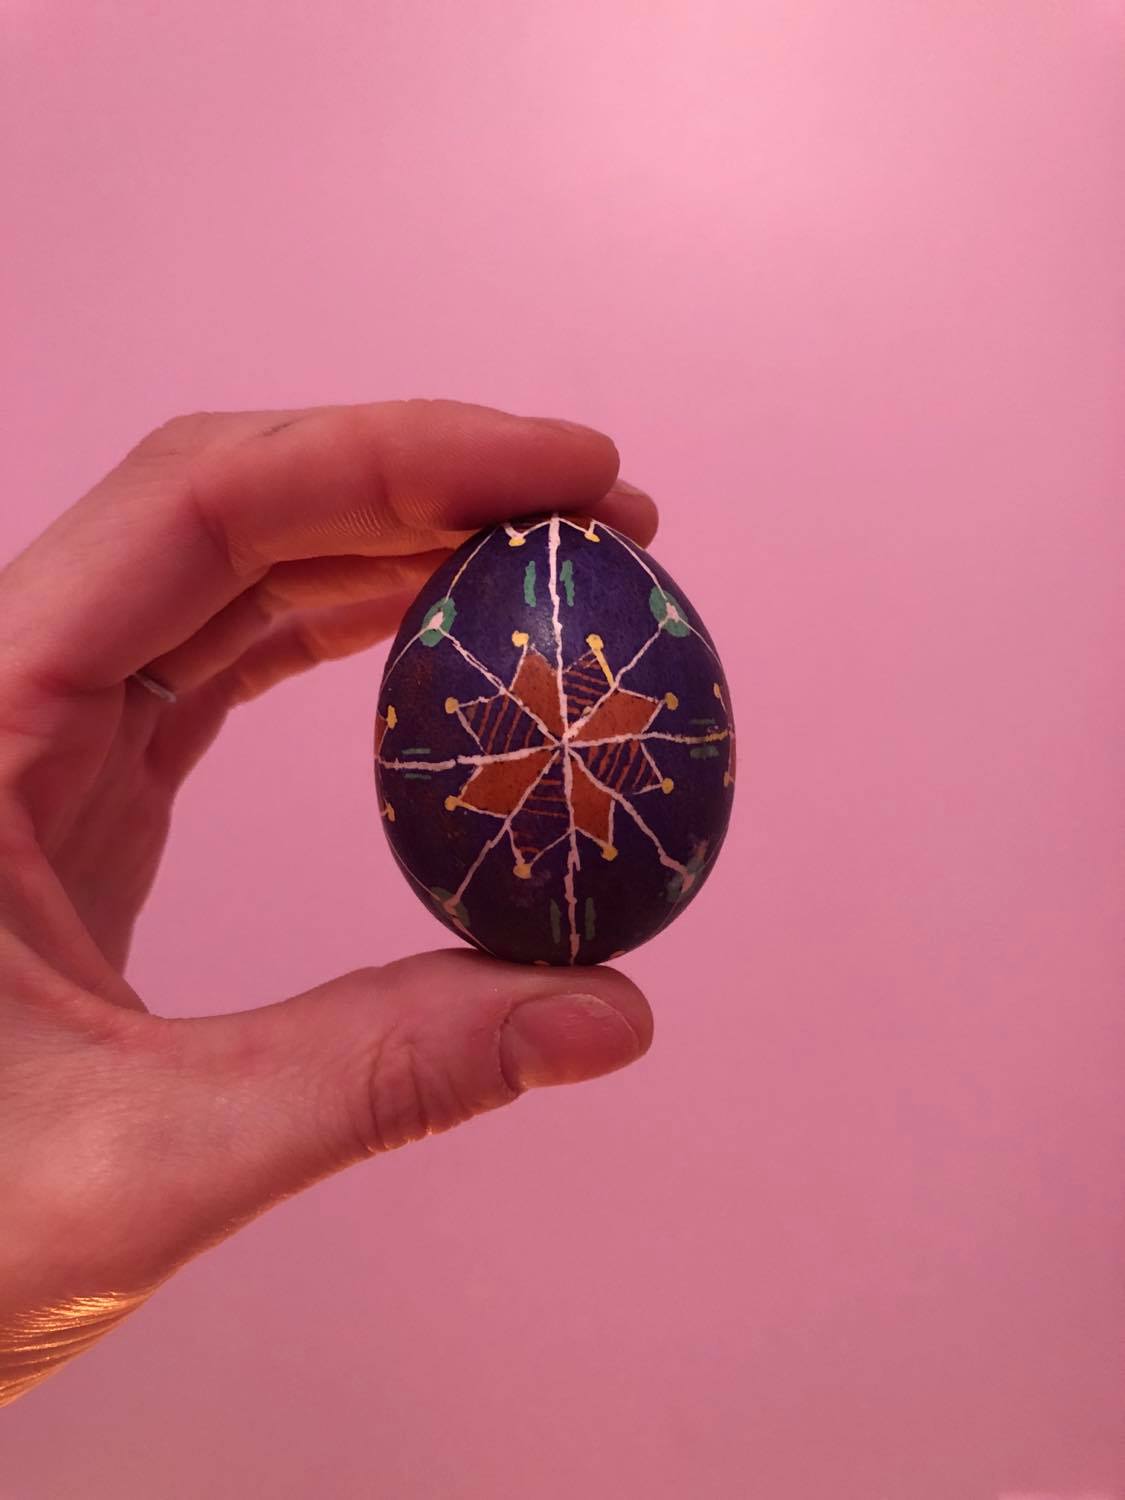 An egg with a purple background, and a star shape in the middle, alternating orange and striped purple, which the unfinished egg turned into.